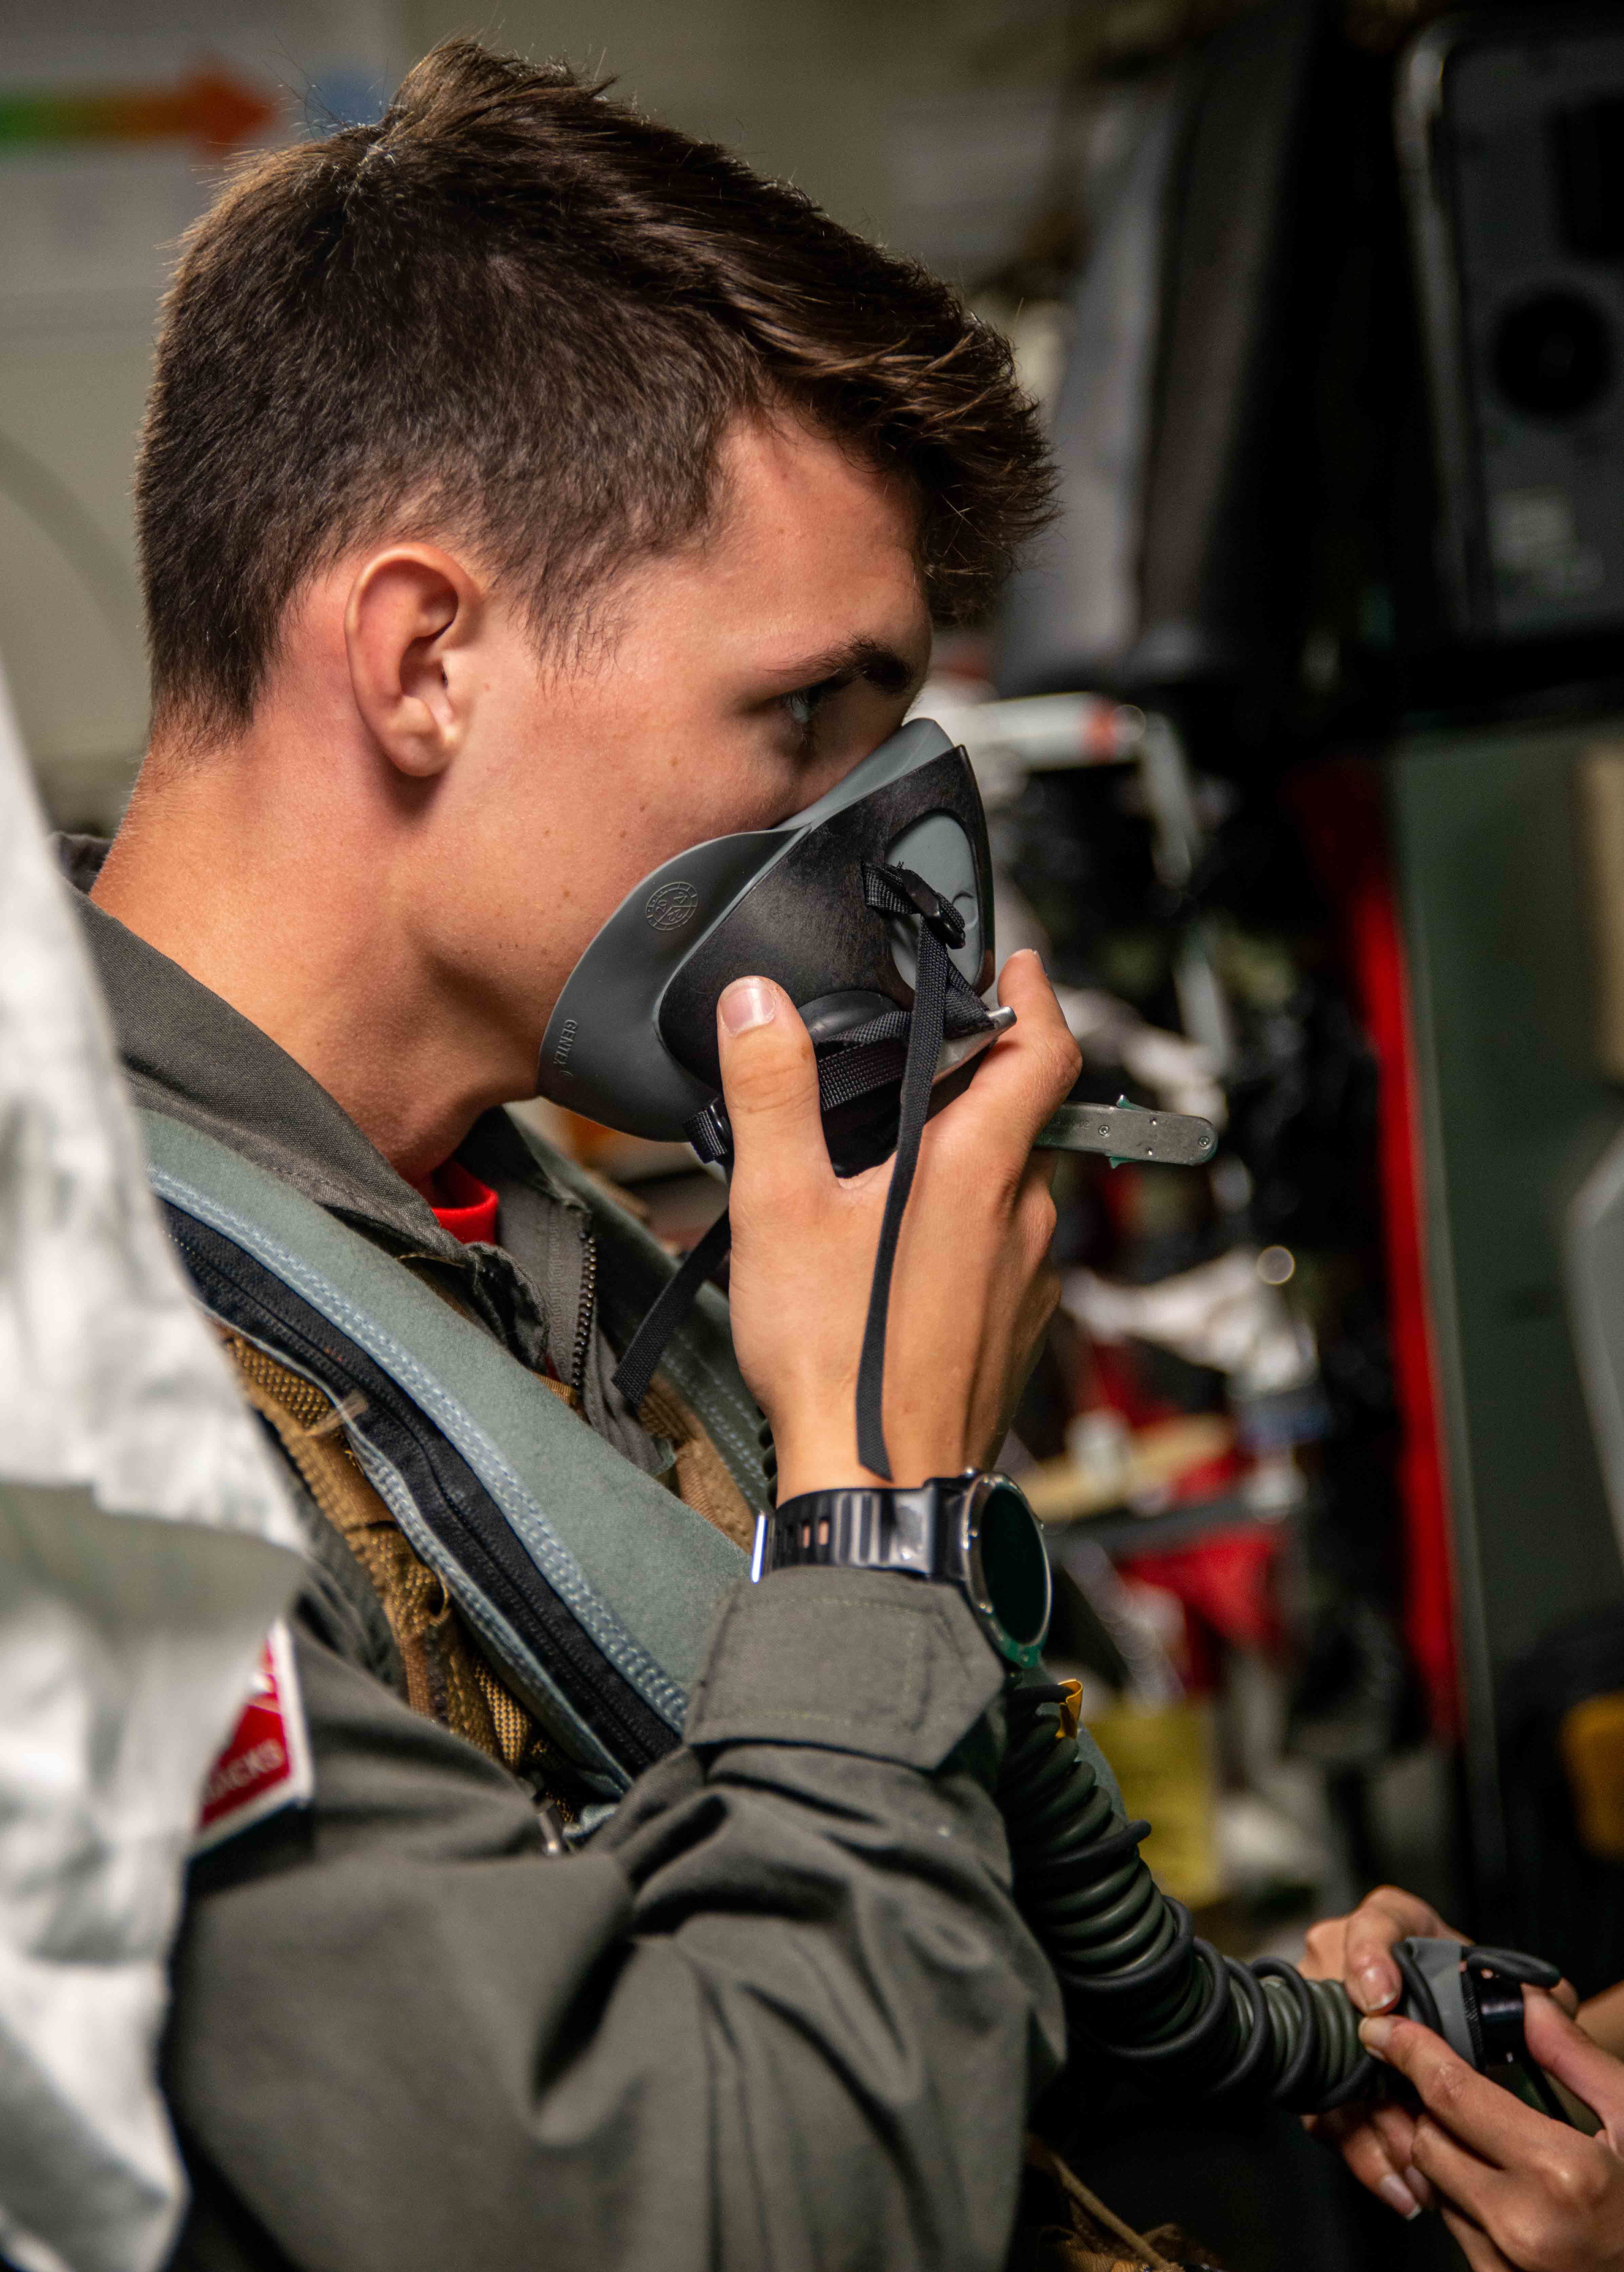 Midshipman 1st Class Nate Williams, from Narragansett, Rhode Island, checks for a tight seal on his oxygen mask in the aircrew survival equipmentman shop for the "Diamondbacks" of Strike Fighter Squadron (VFA) 102 aboard the U.S. Navy's only forward-deployed aircraft carrier USS Ronald Reagan (CVN 76).